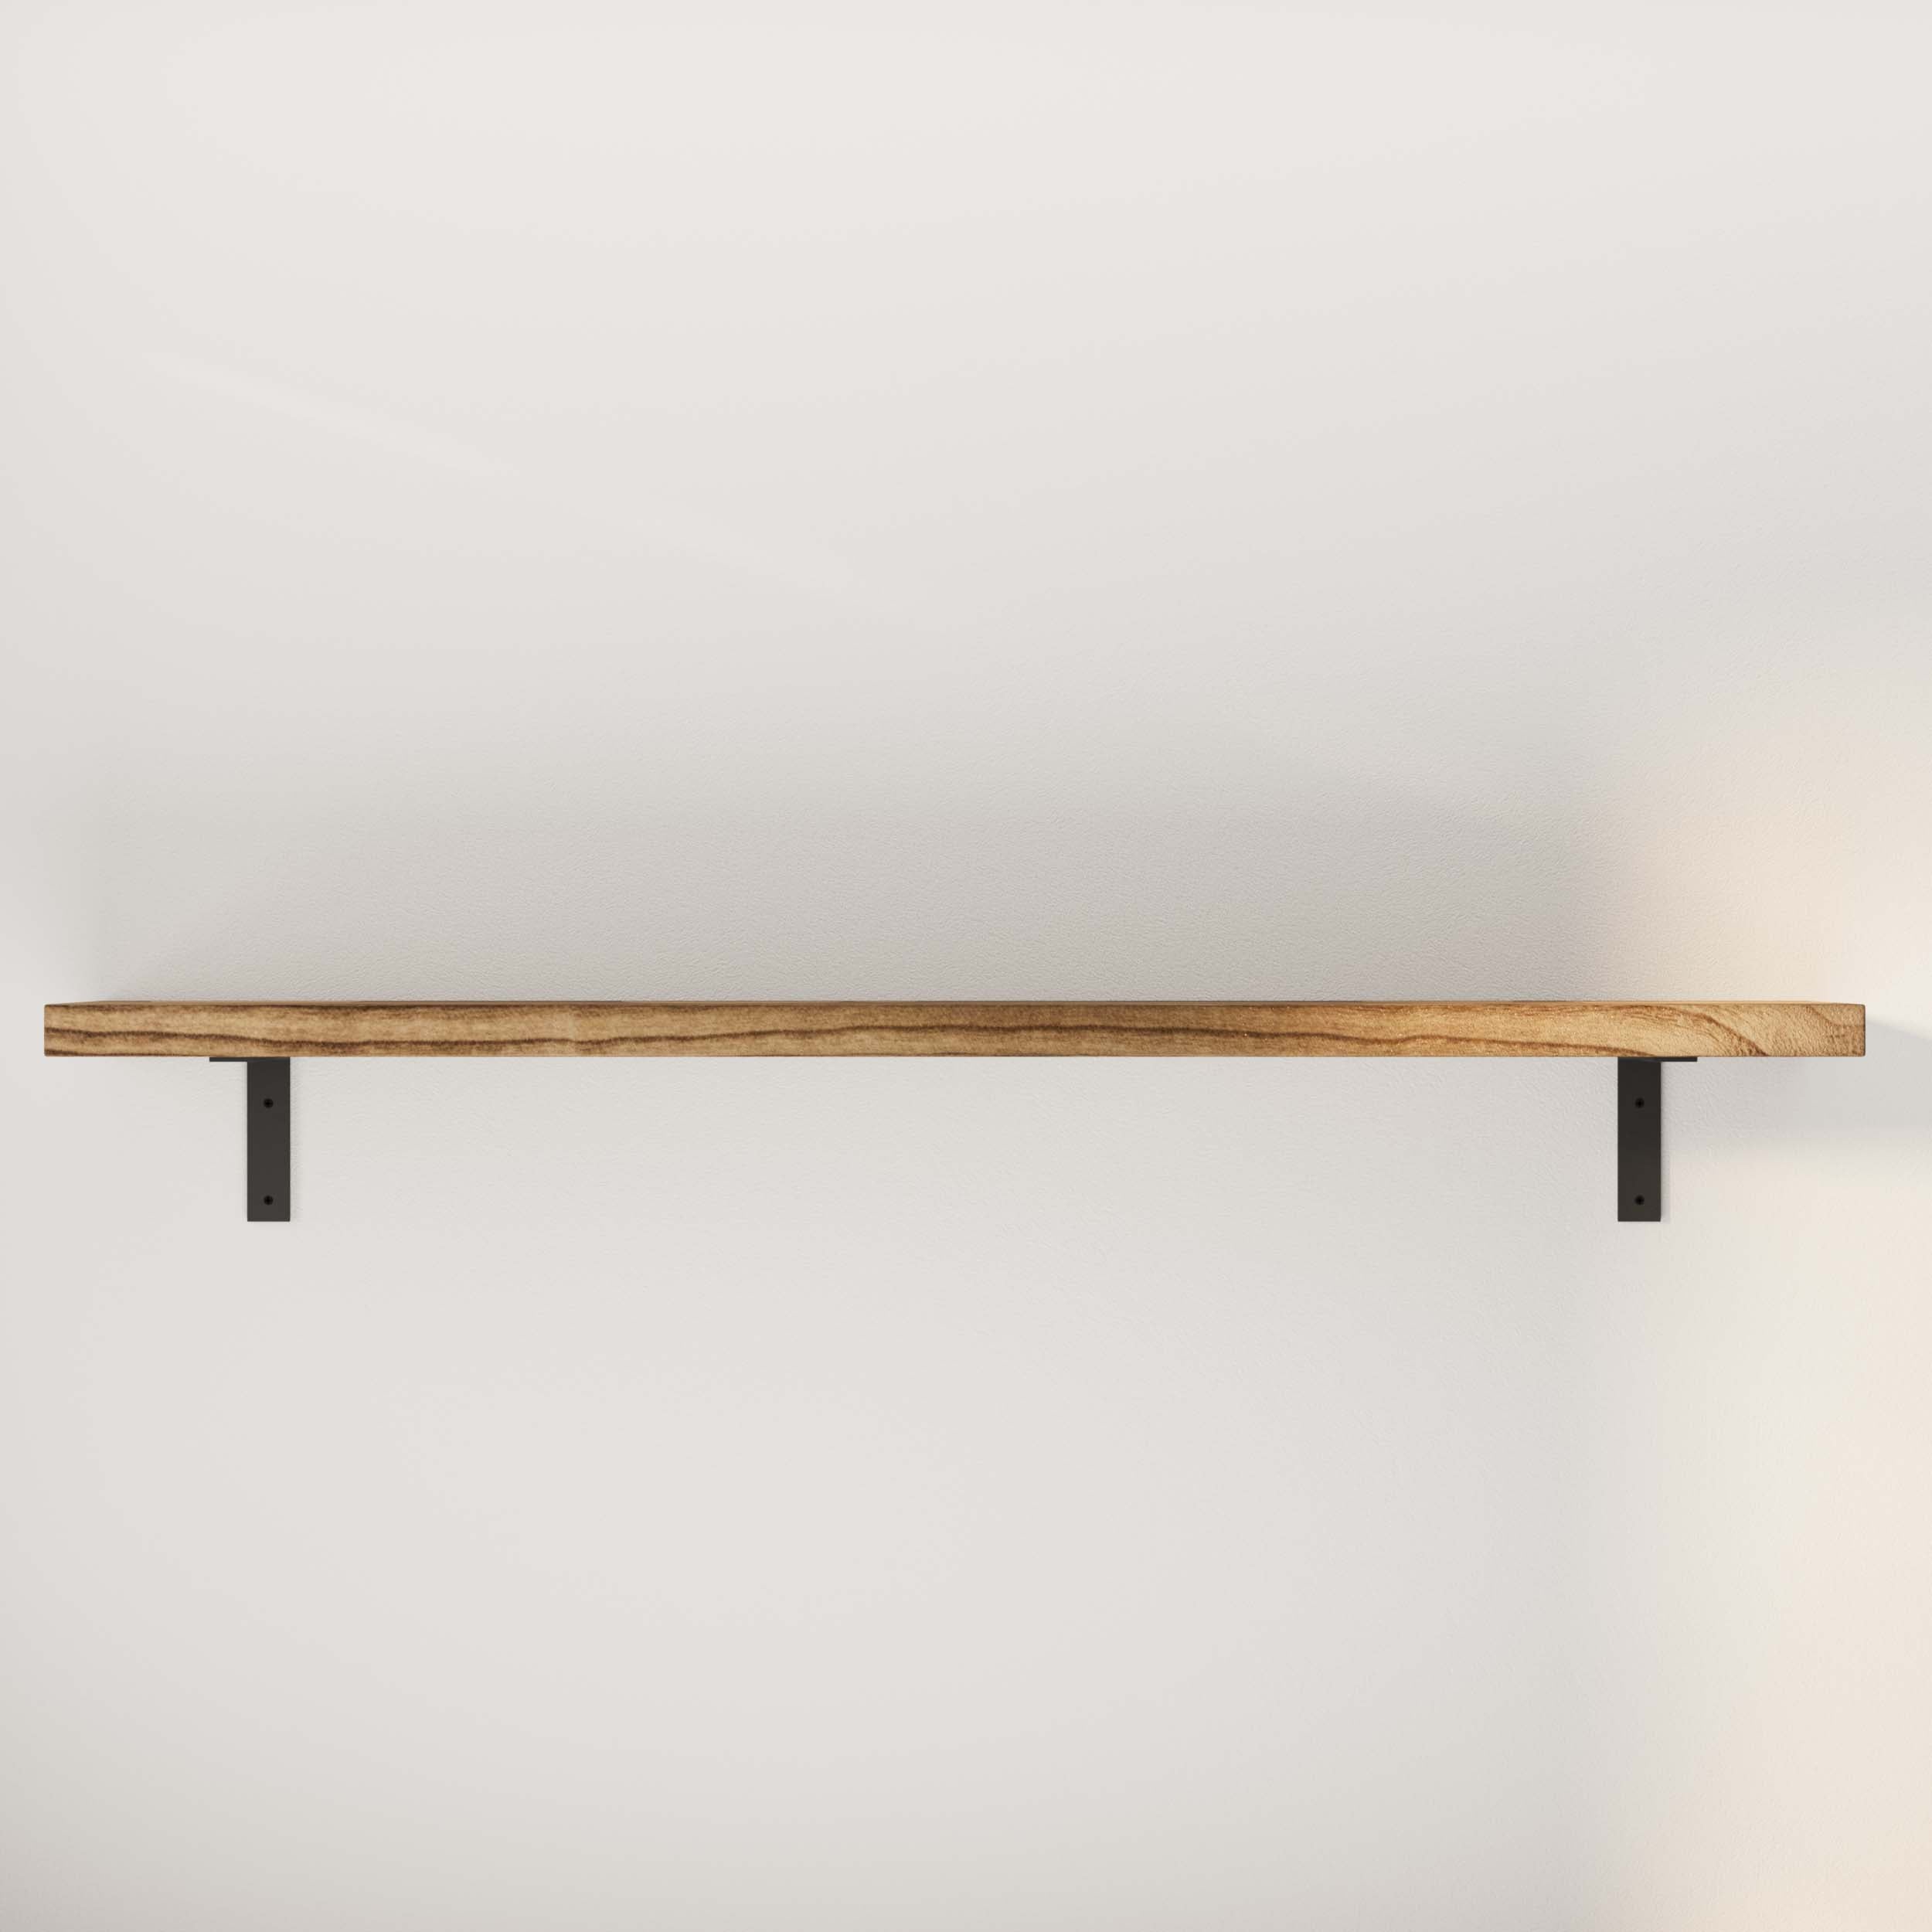 An organizer shelf on a white wall, supported by two black brackets, with a soft shadow beneath it.